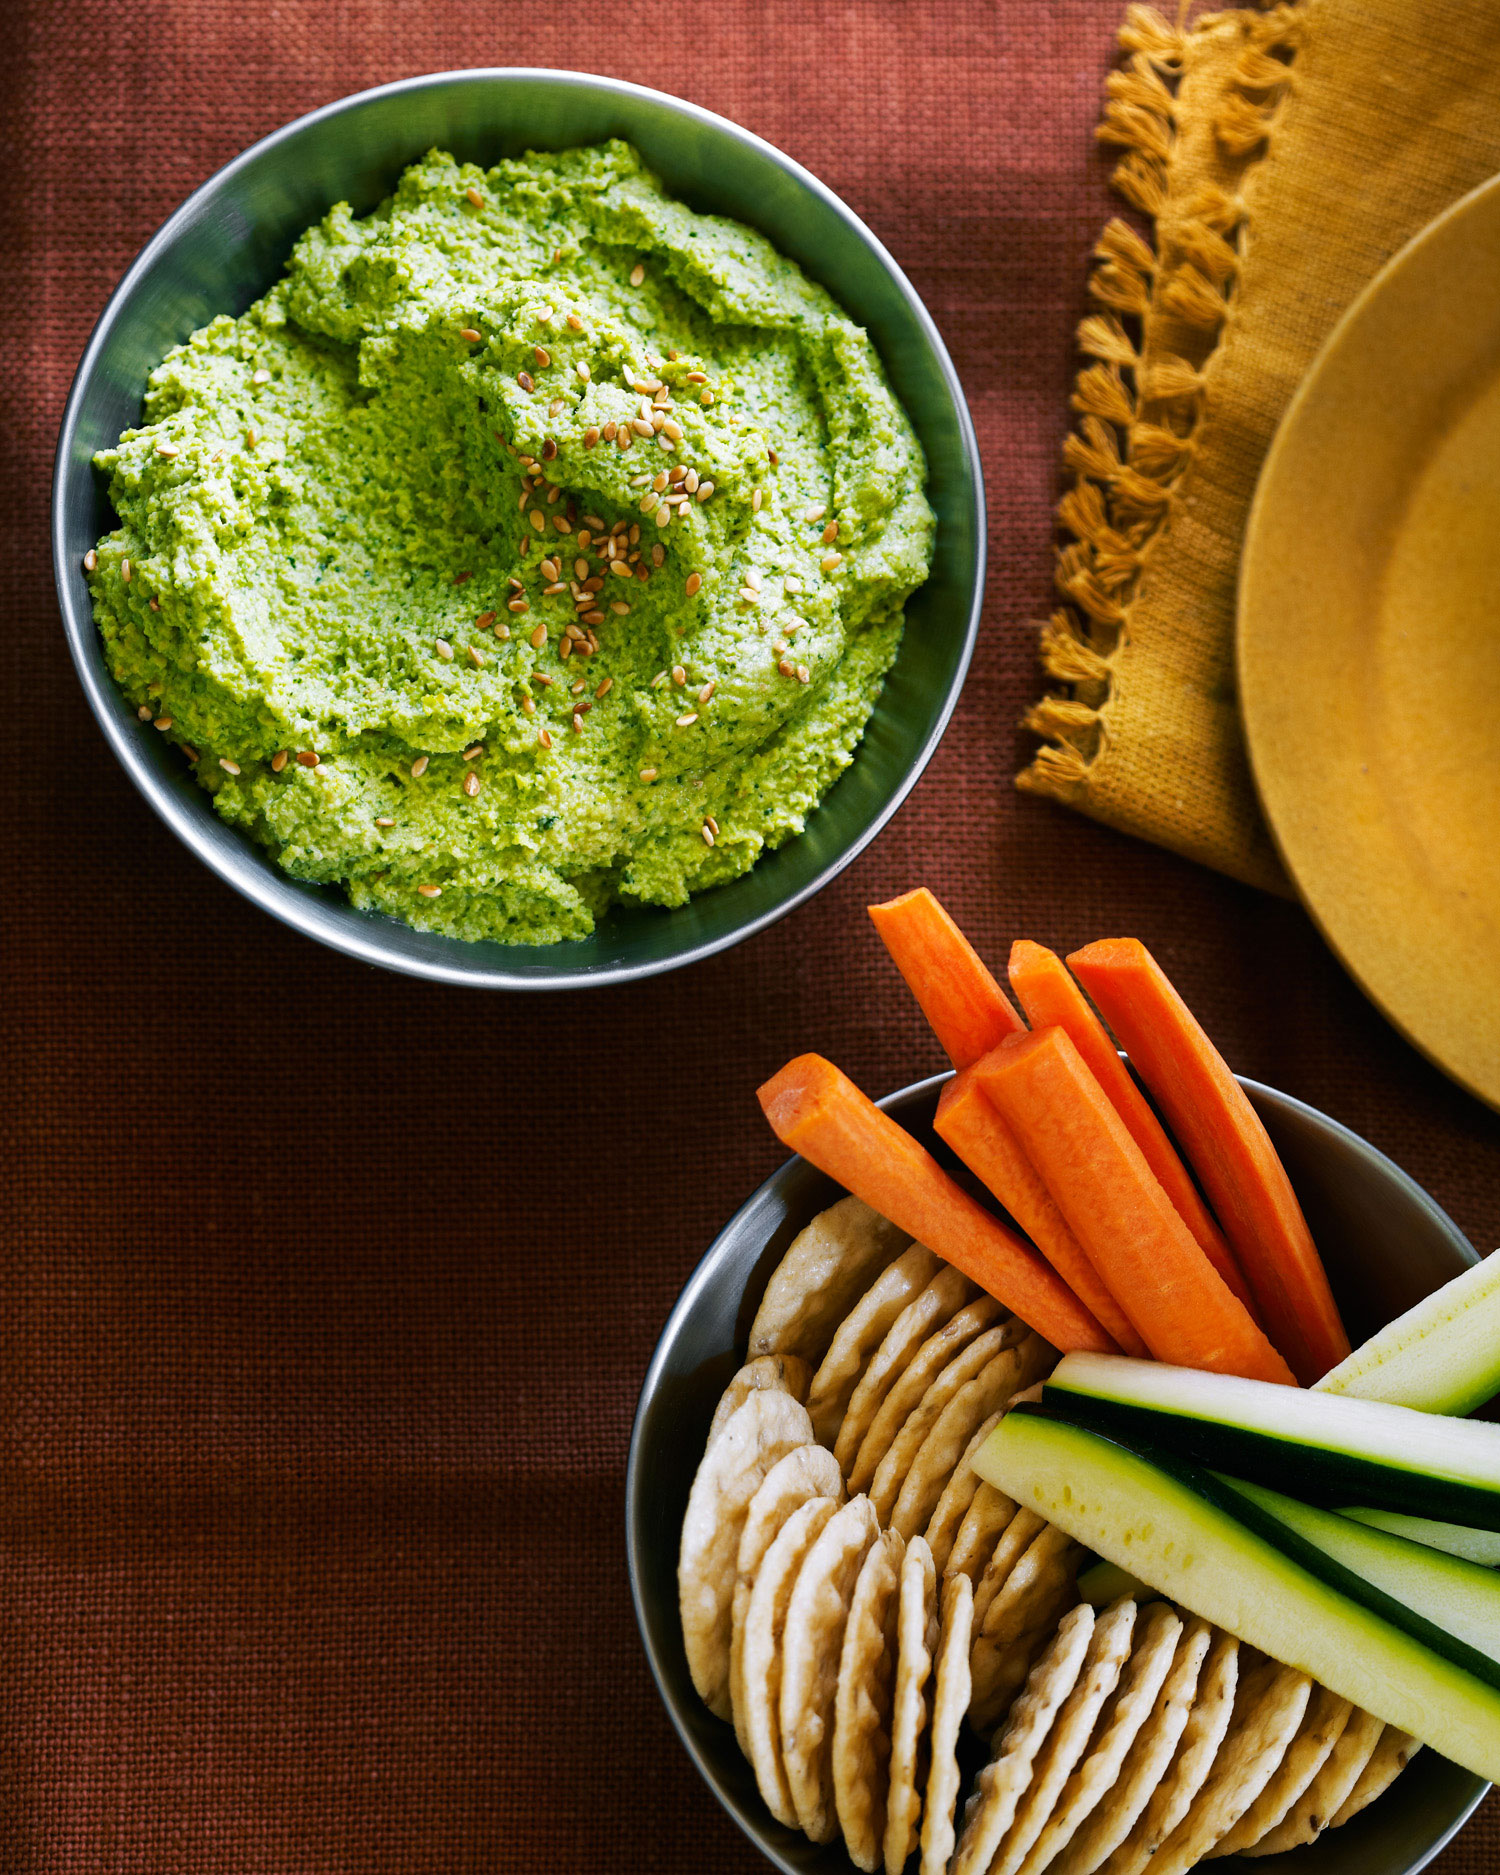 23 Delicious Party Dips - Sunset Magazine